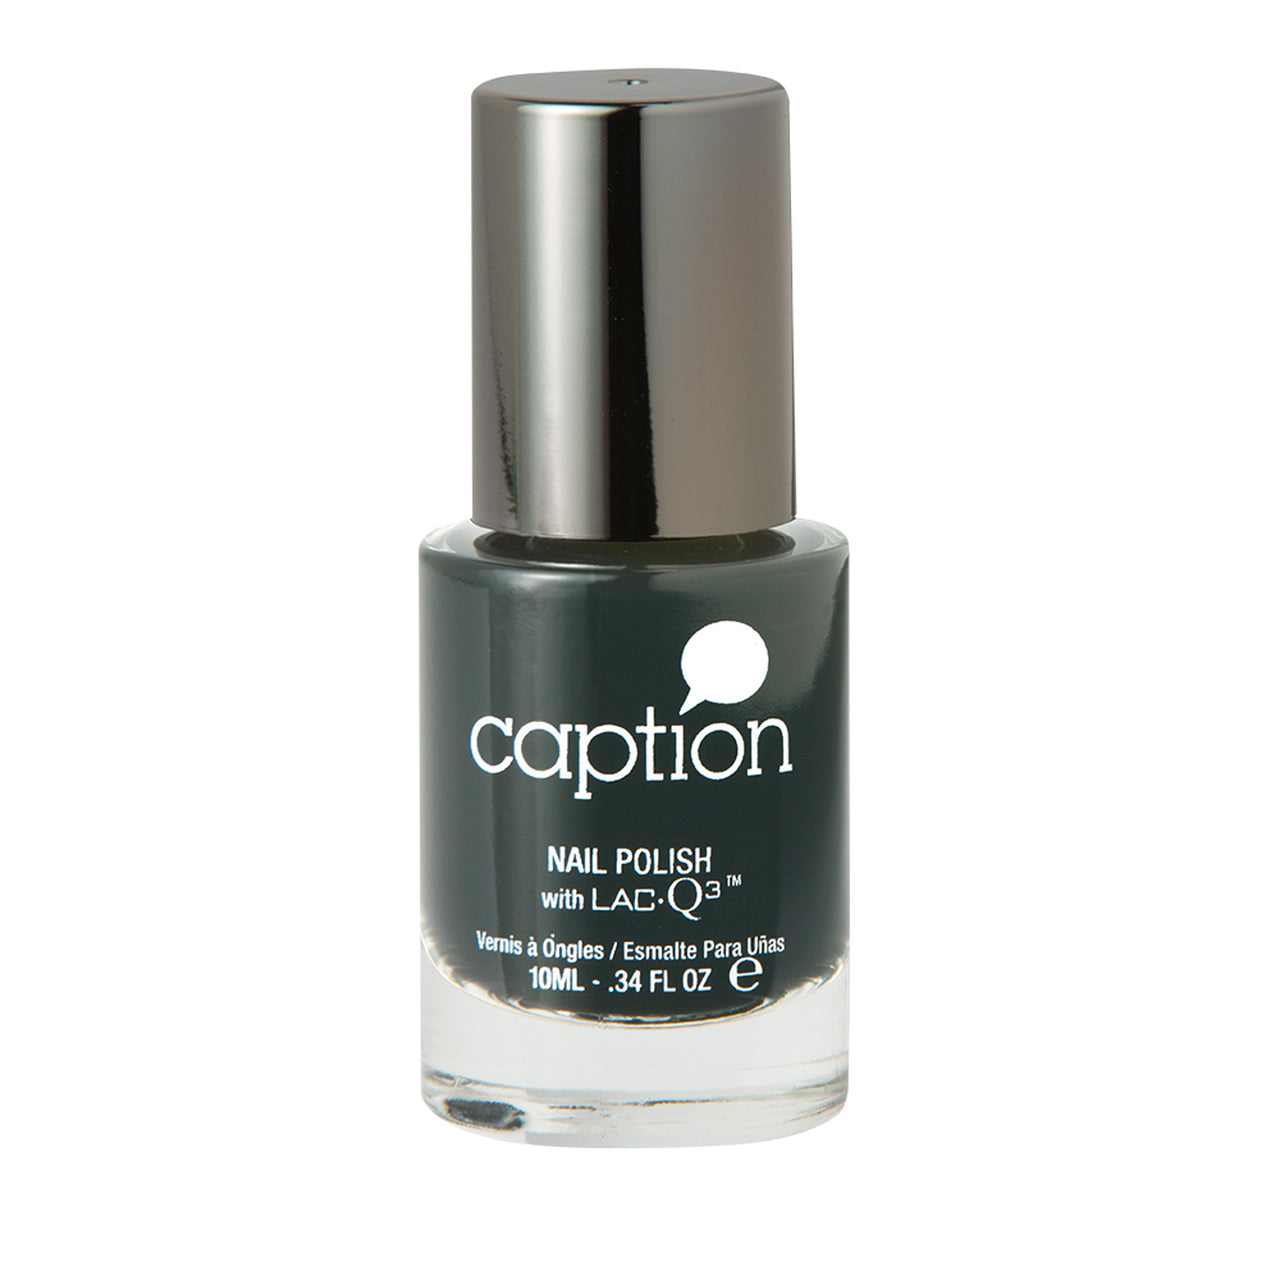 YOUNG NAILS CAPTION NAIL POLISH GOOD FOR HER .5oz